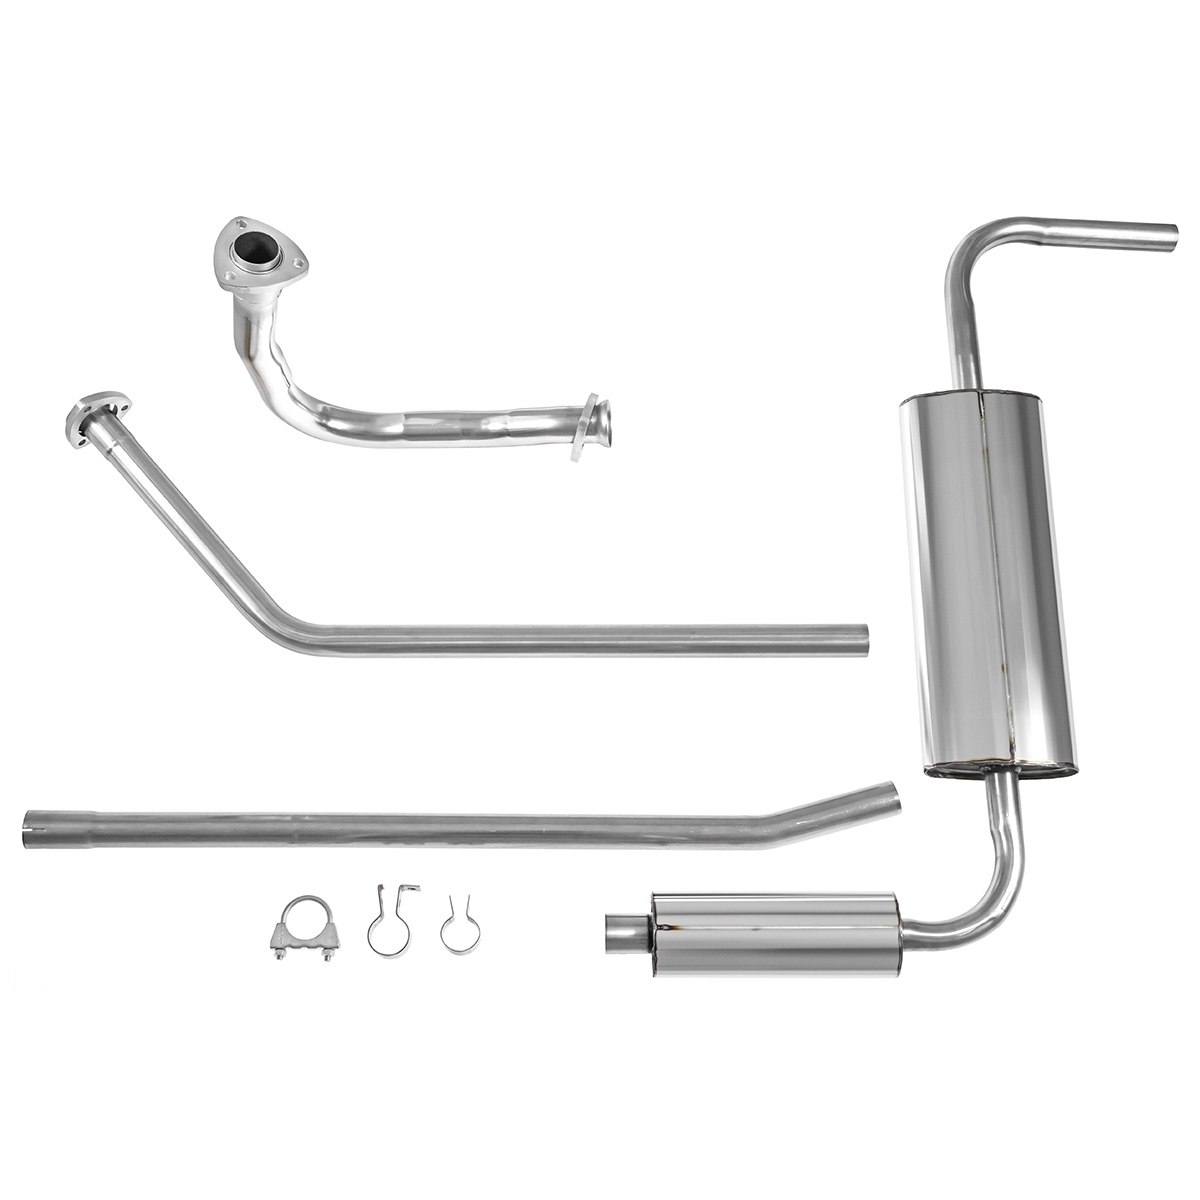 MG Midget 1500cc Standard Exhaust system Stainless Steel Bell Exhausts